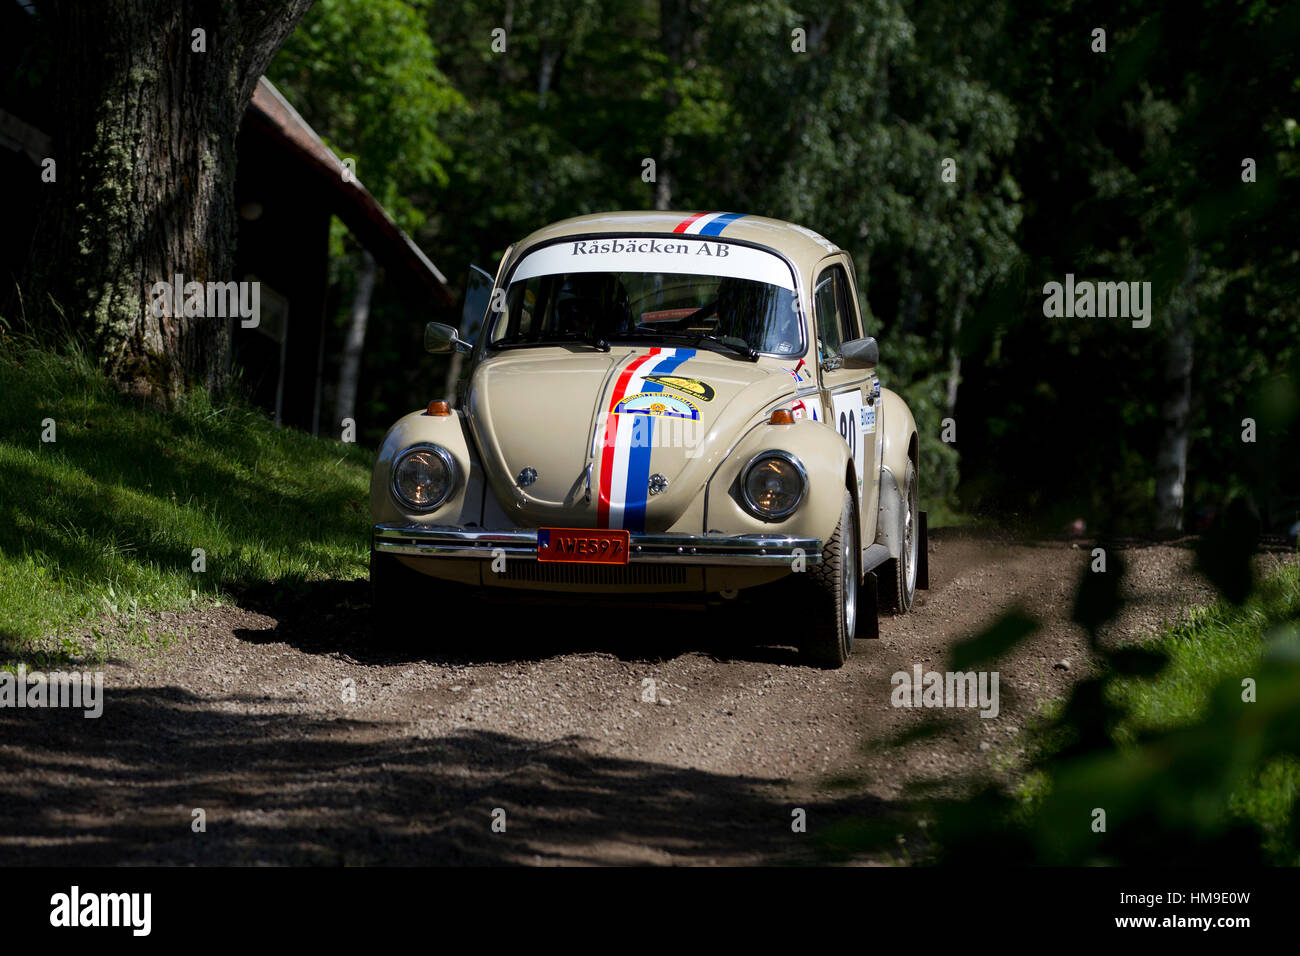 Rally car at full speed on a dirt road in Sweden Stock Photo